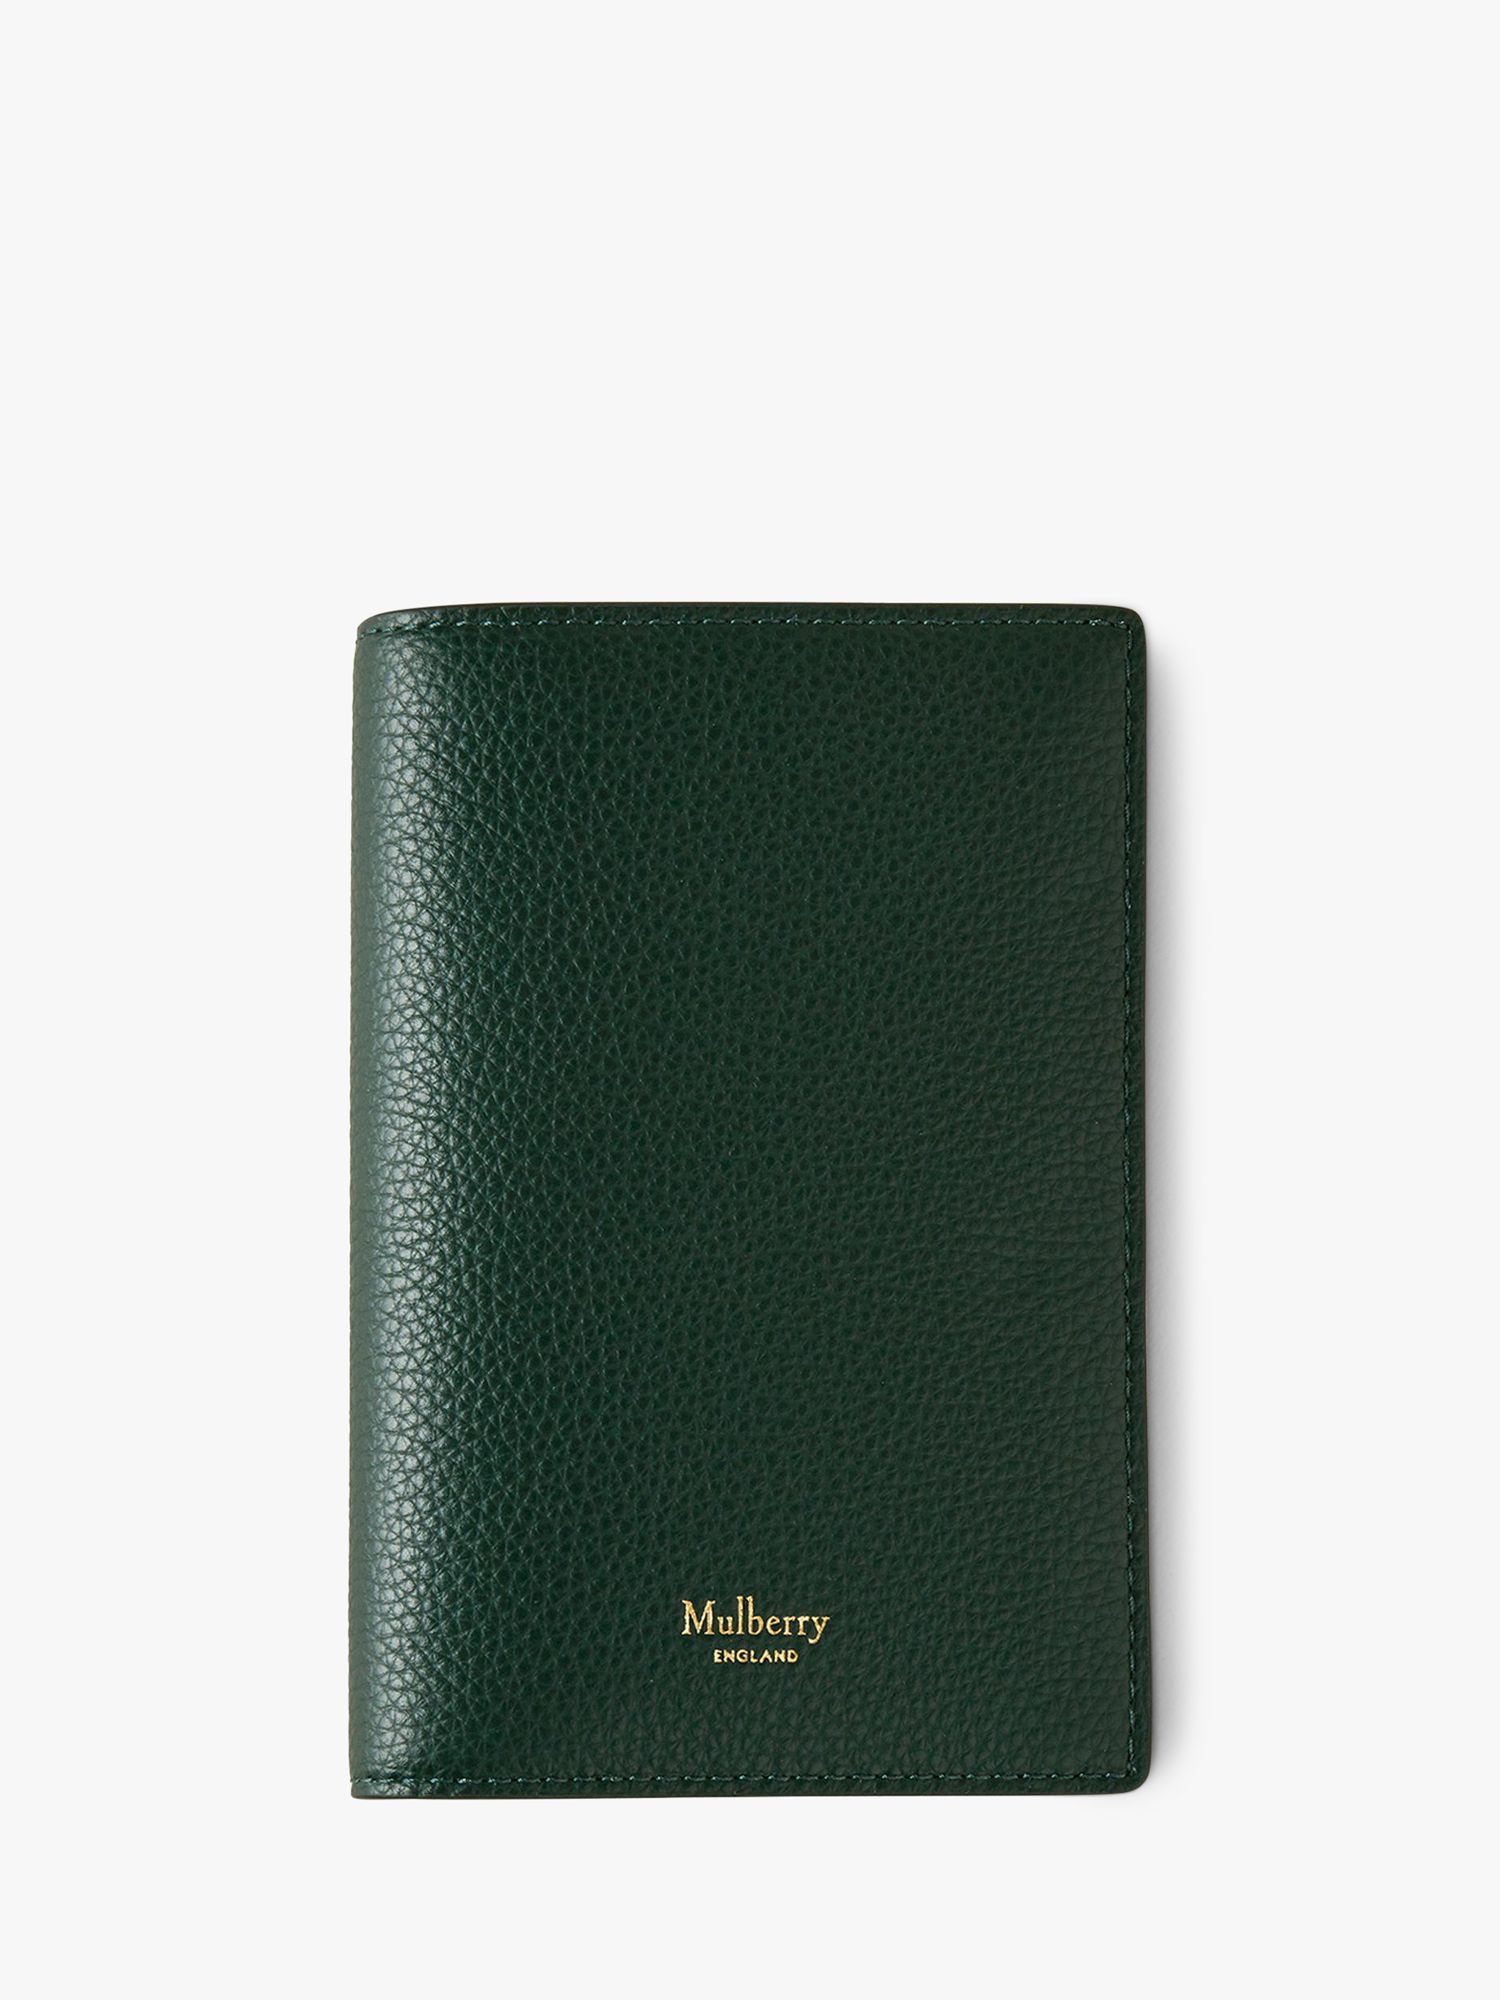 Mulberry Small Classic Grain Leather Passport Cover